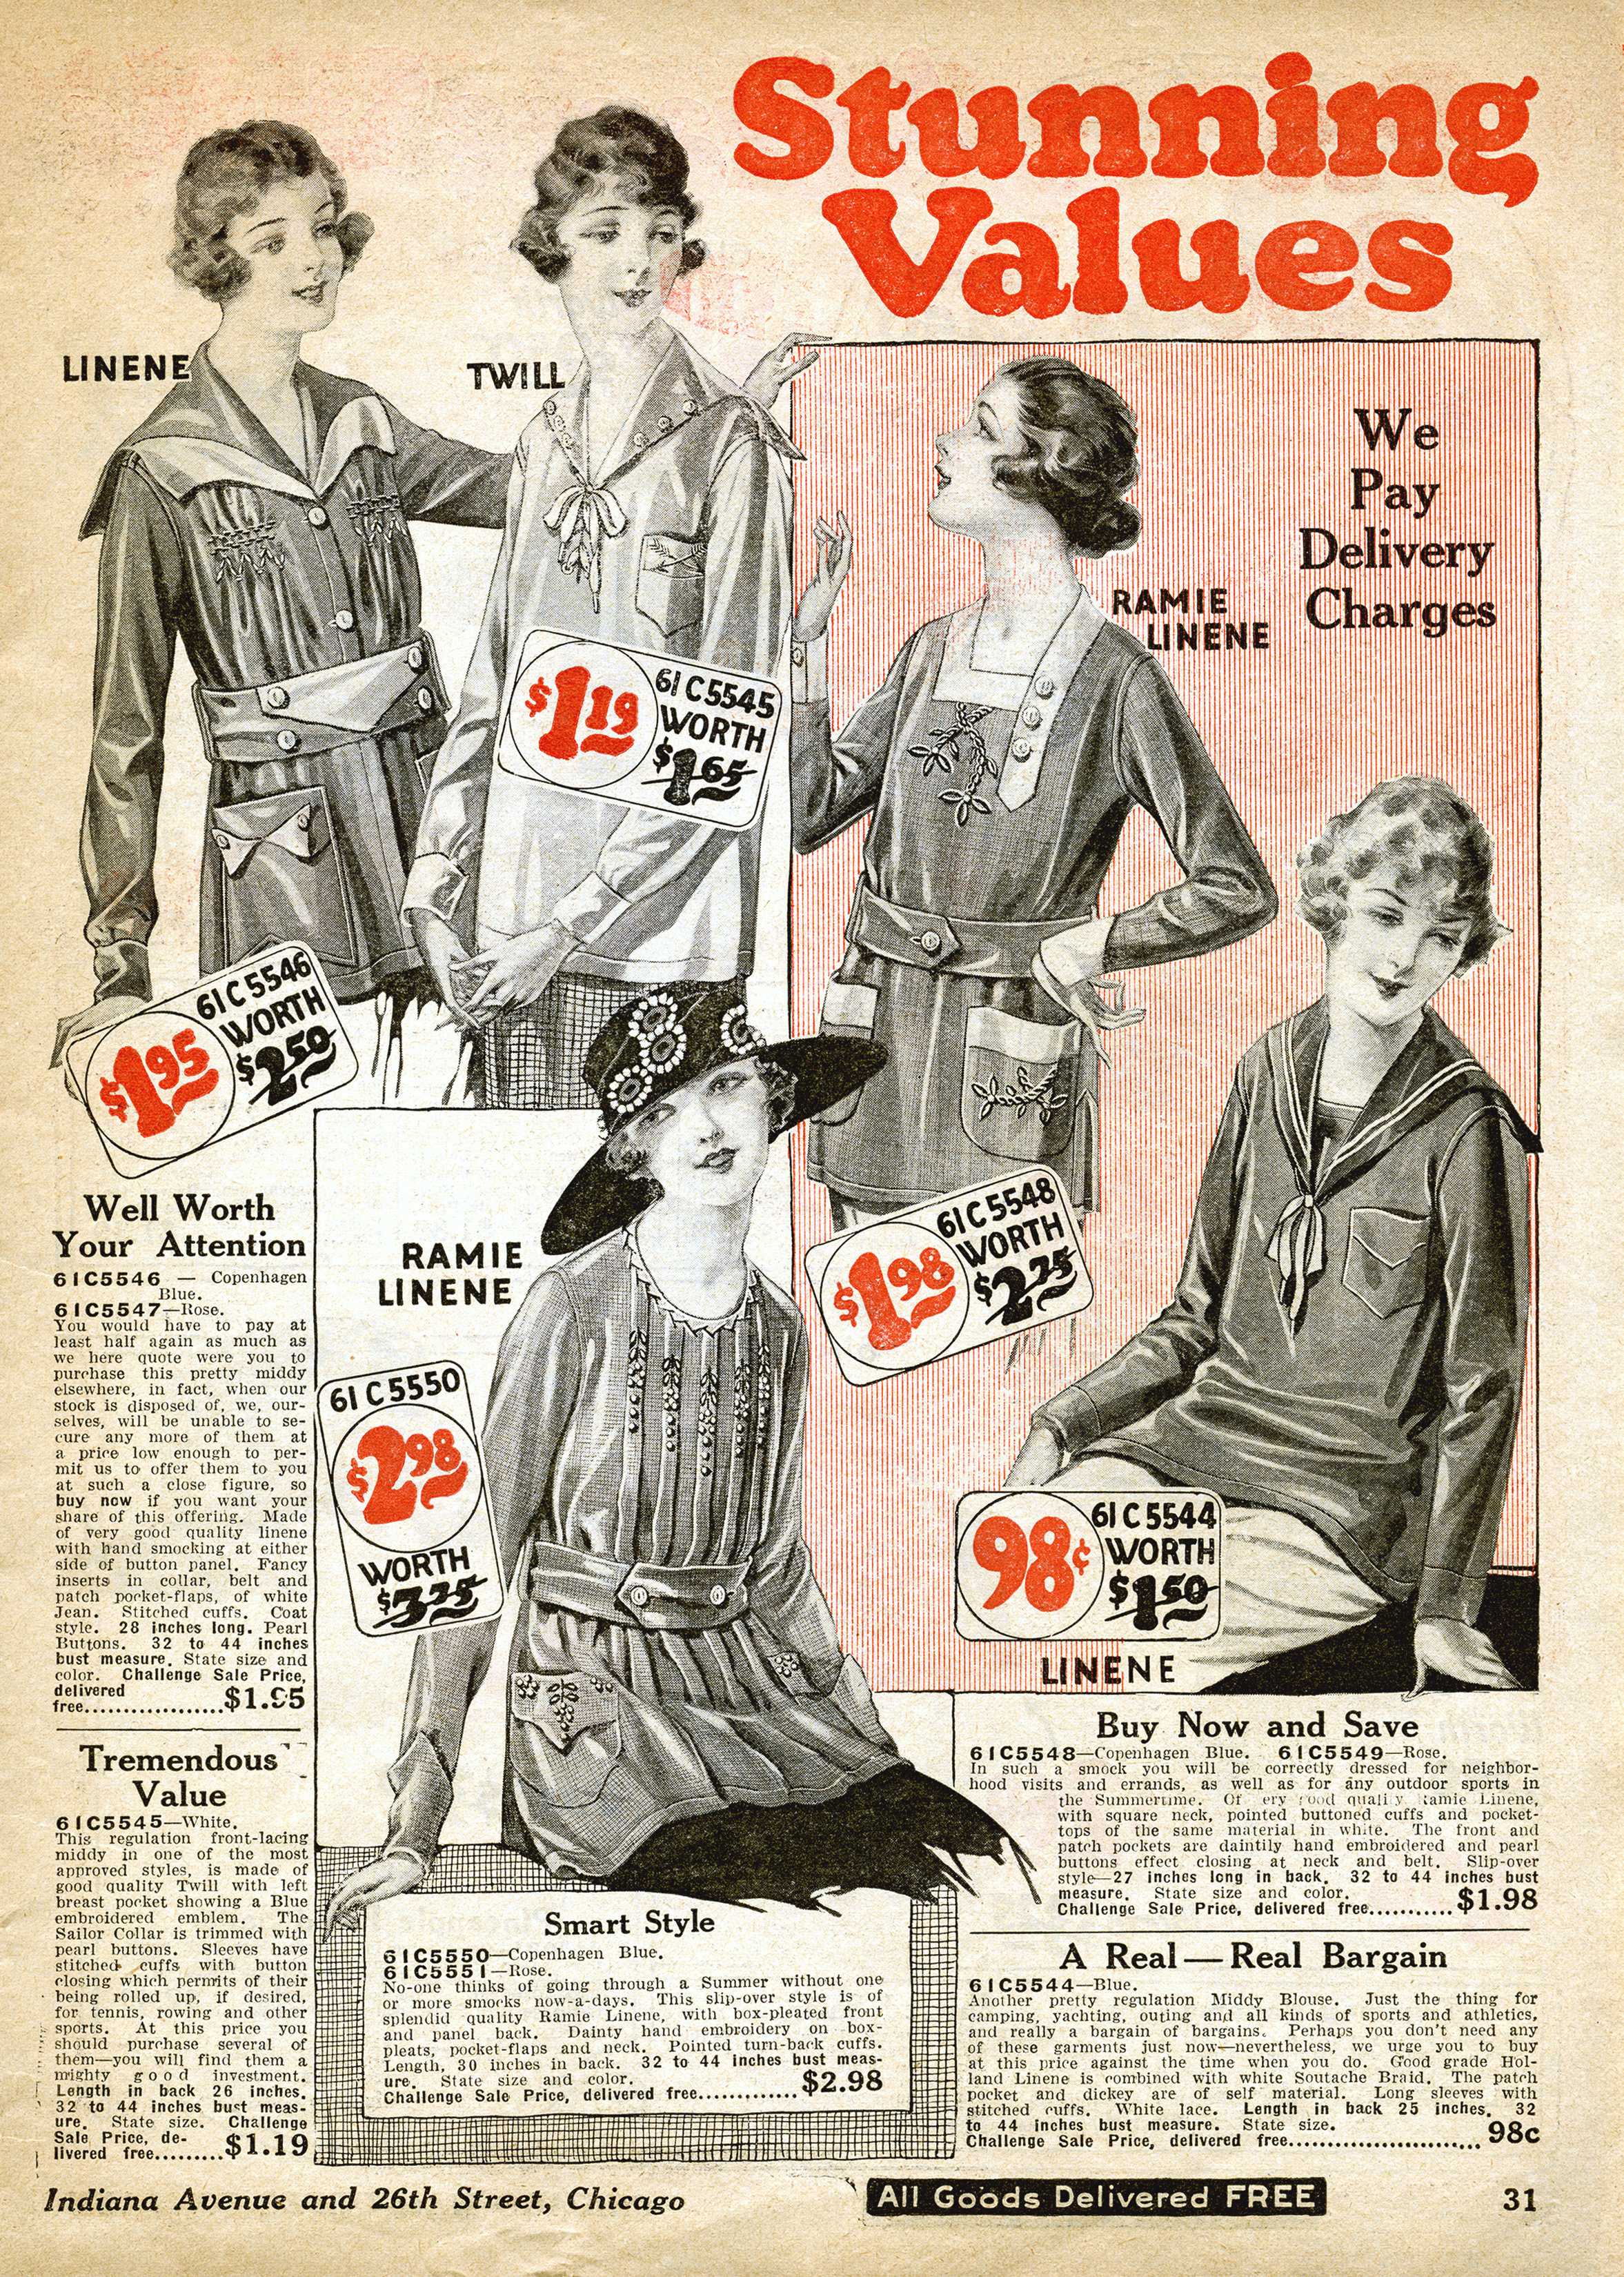 vintage catalogue page, antique digital graphics, 1920 fashion image, old fashioned clothing illustration, chicago mail order co